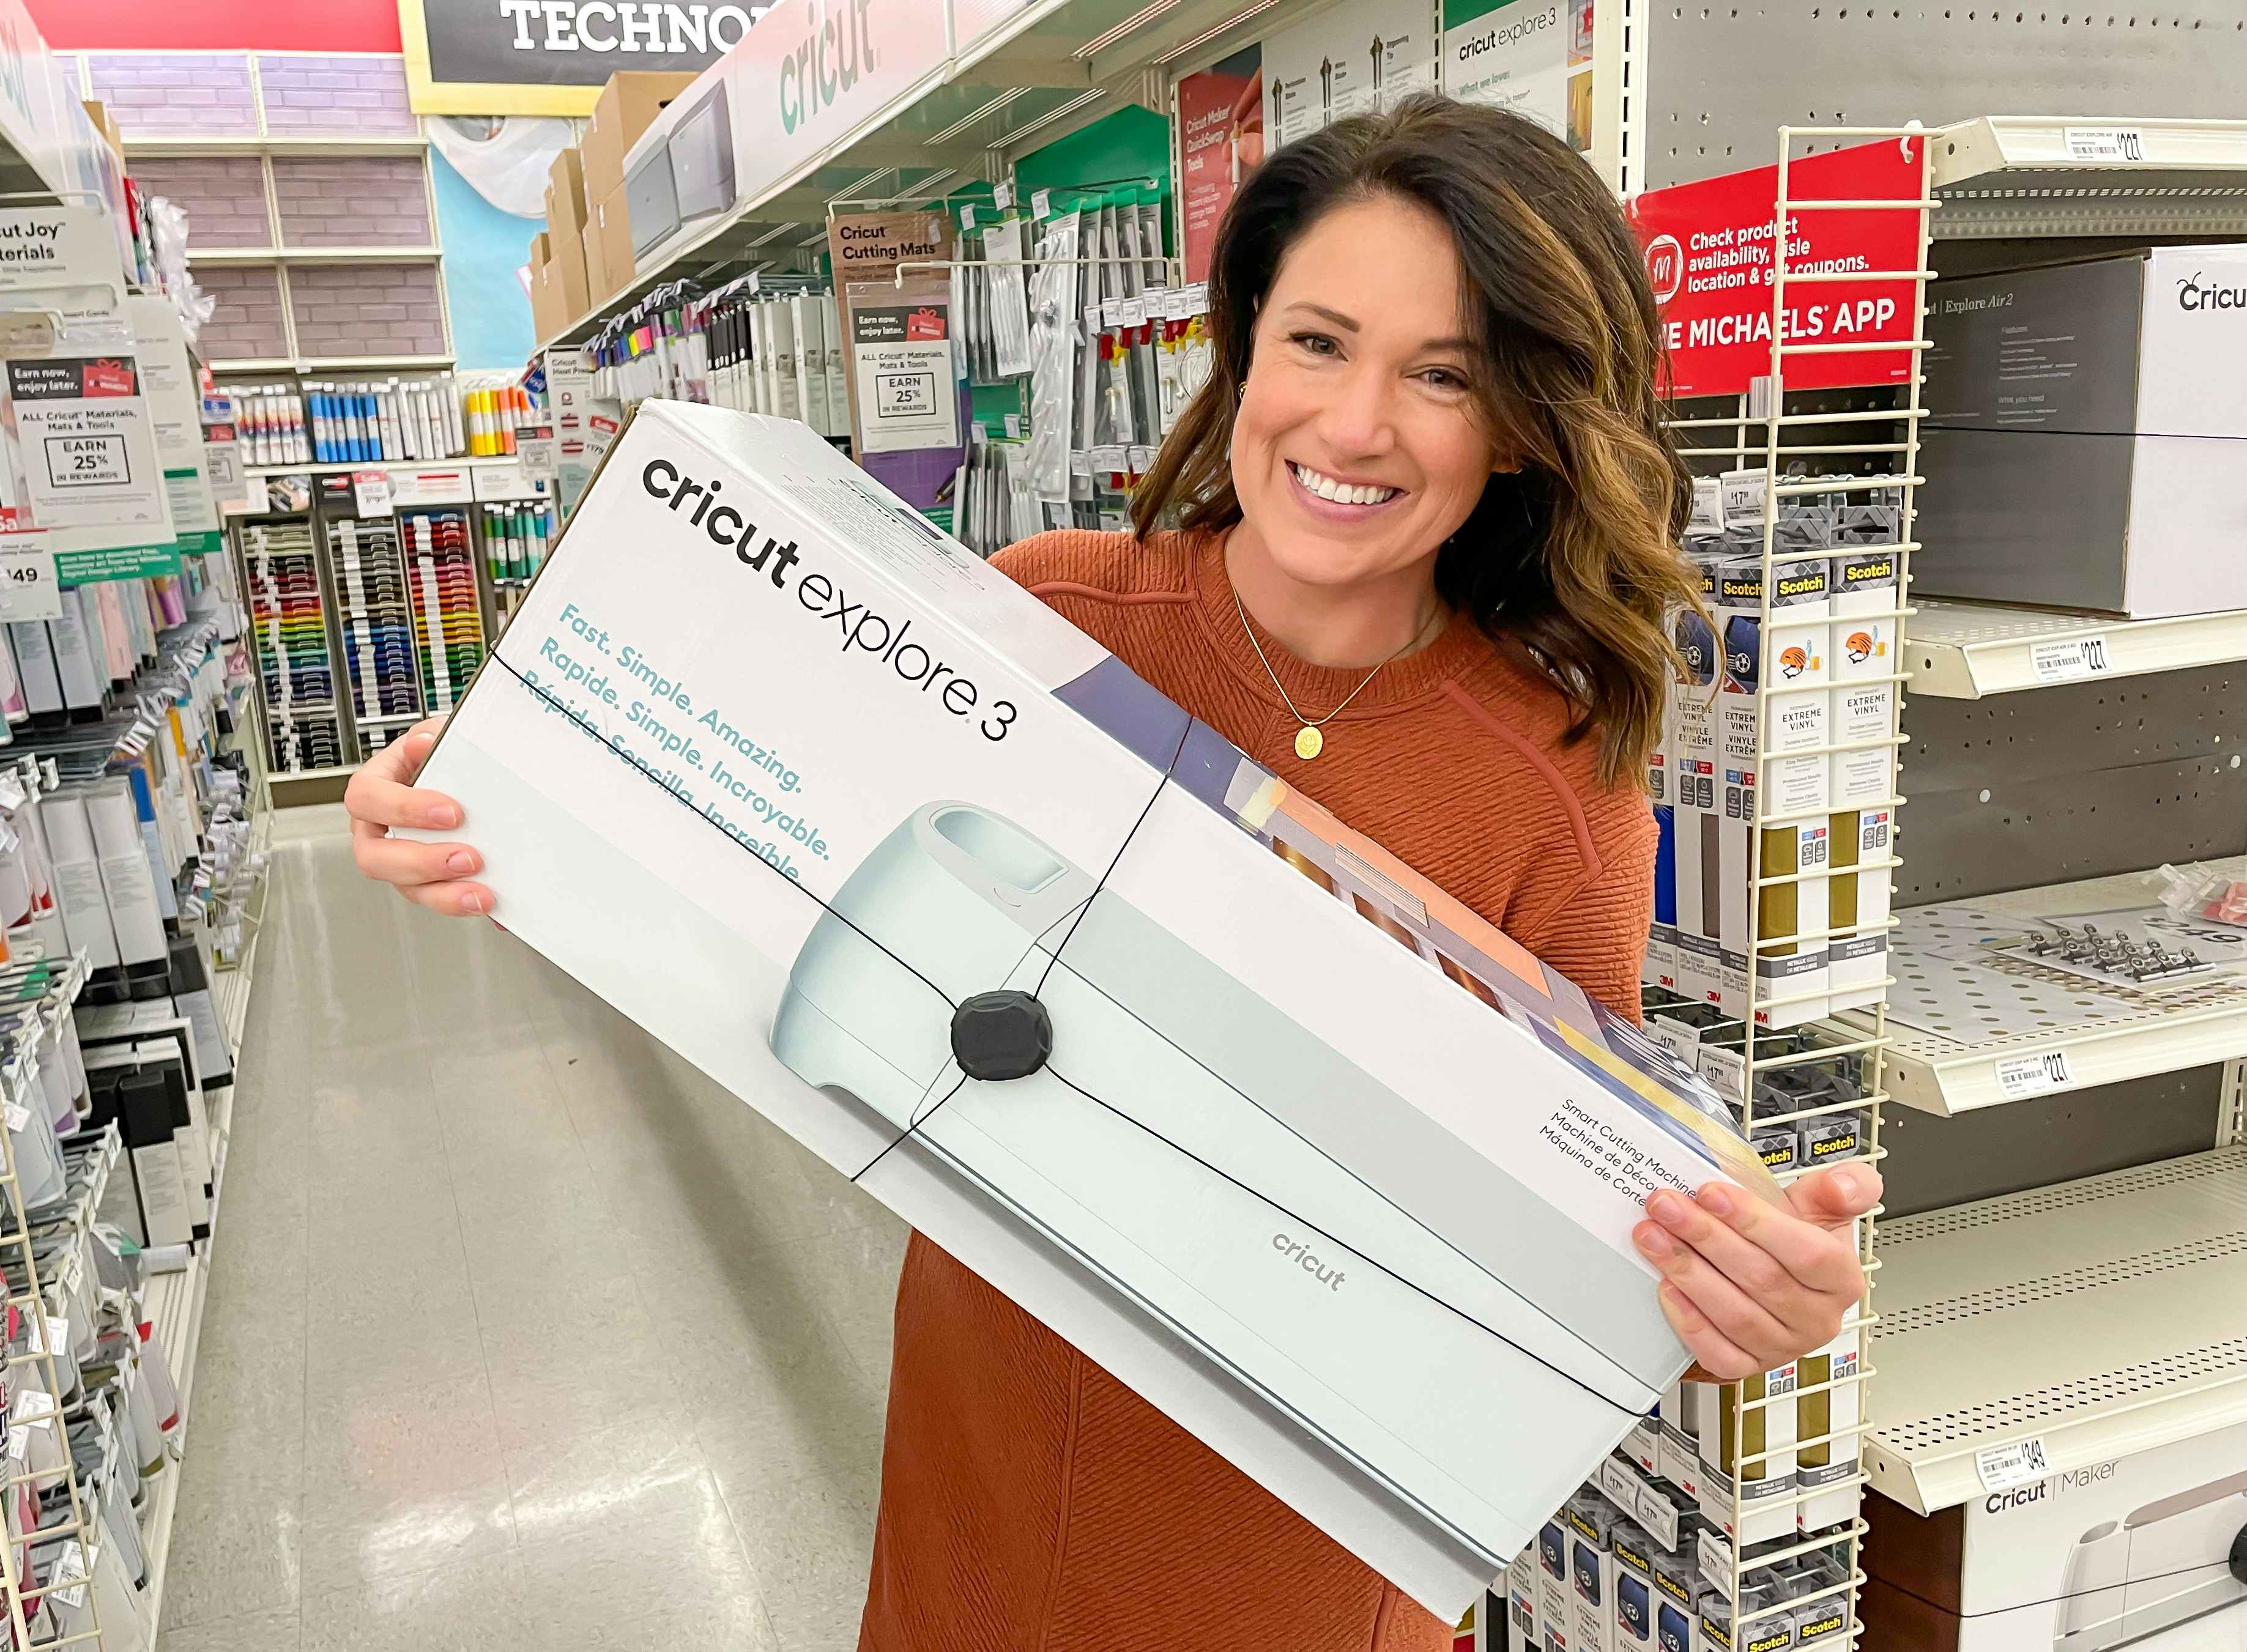 A person holding a Cricut Explore 3 machine in its box while standing in an aisle at Michaels